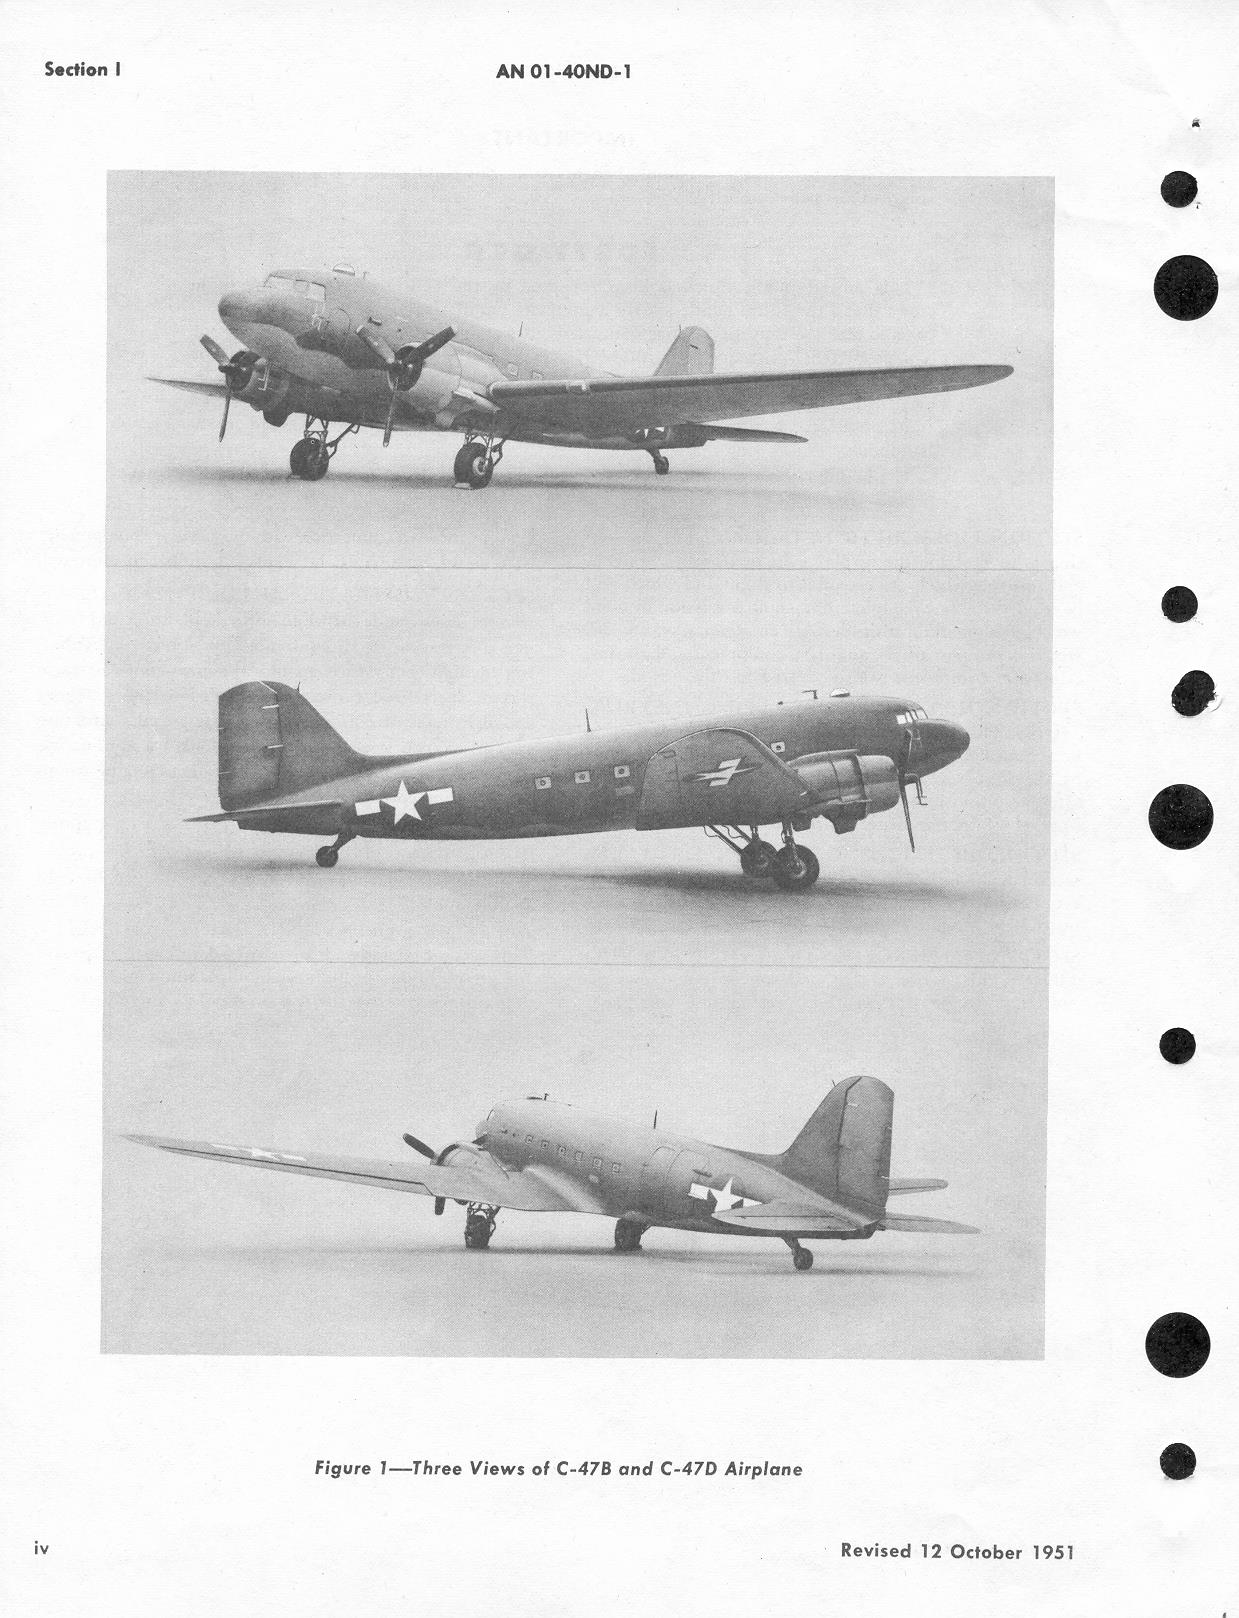 Sample page 6 from AirCorps Library document: Flight Operating Instructions for C-47B, D, and R4D-6 and -7